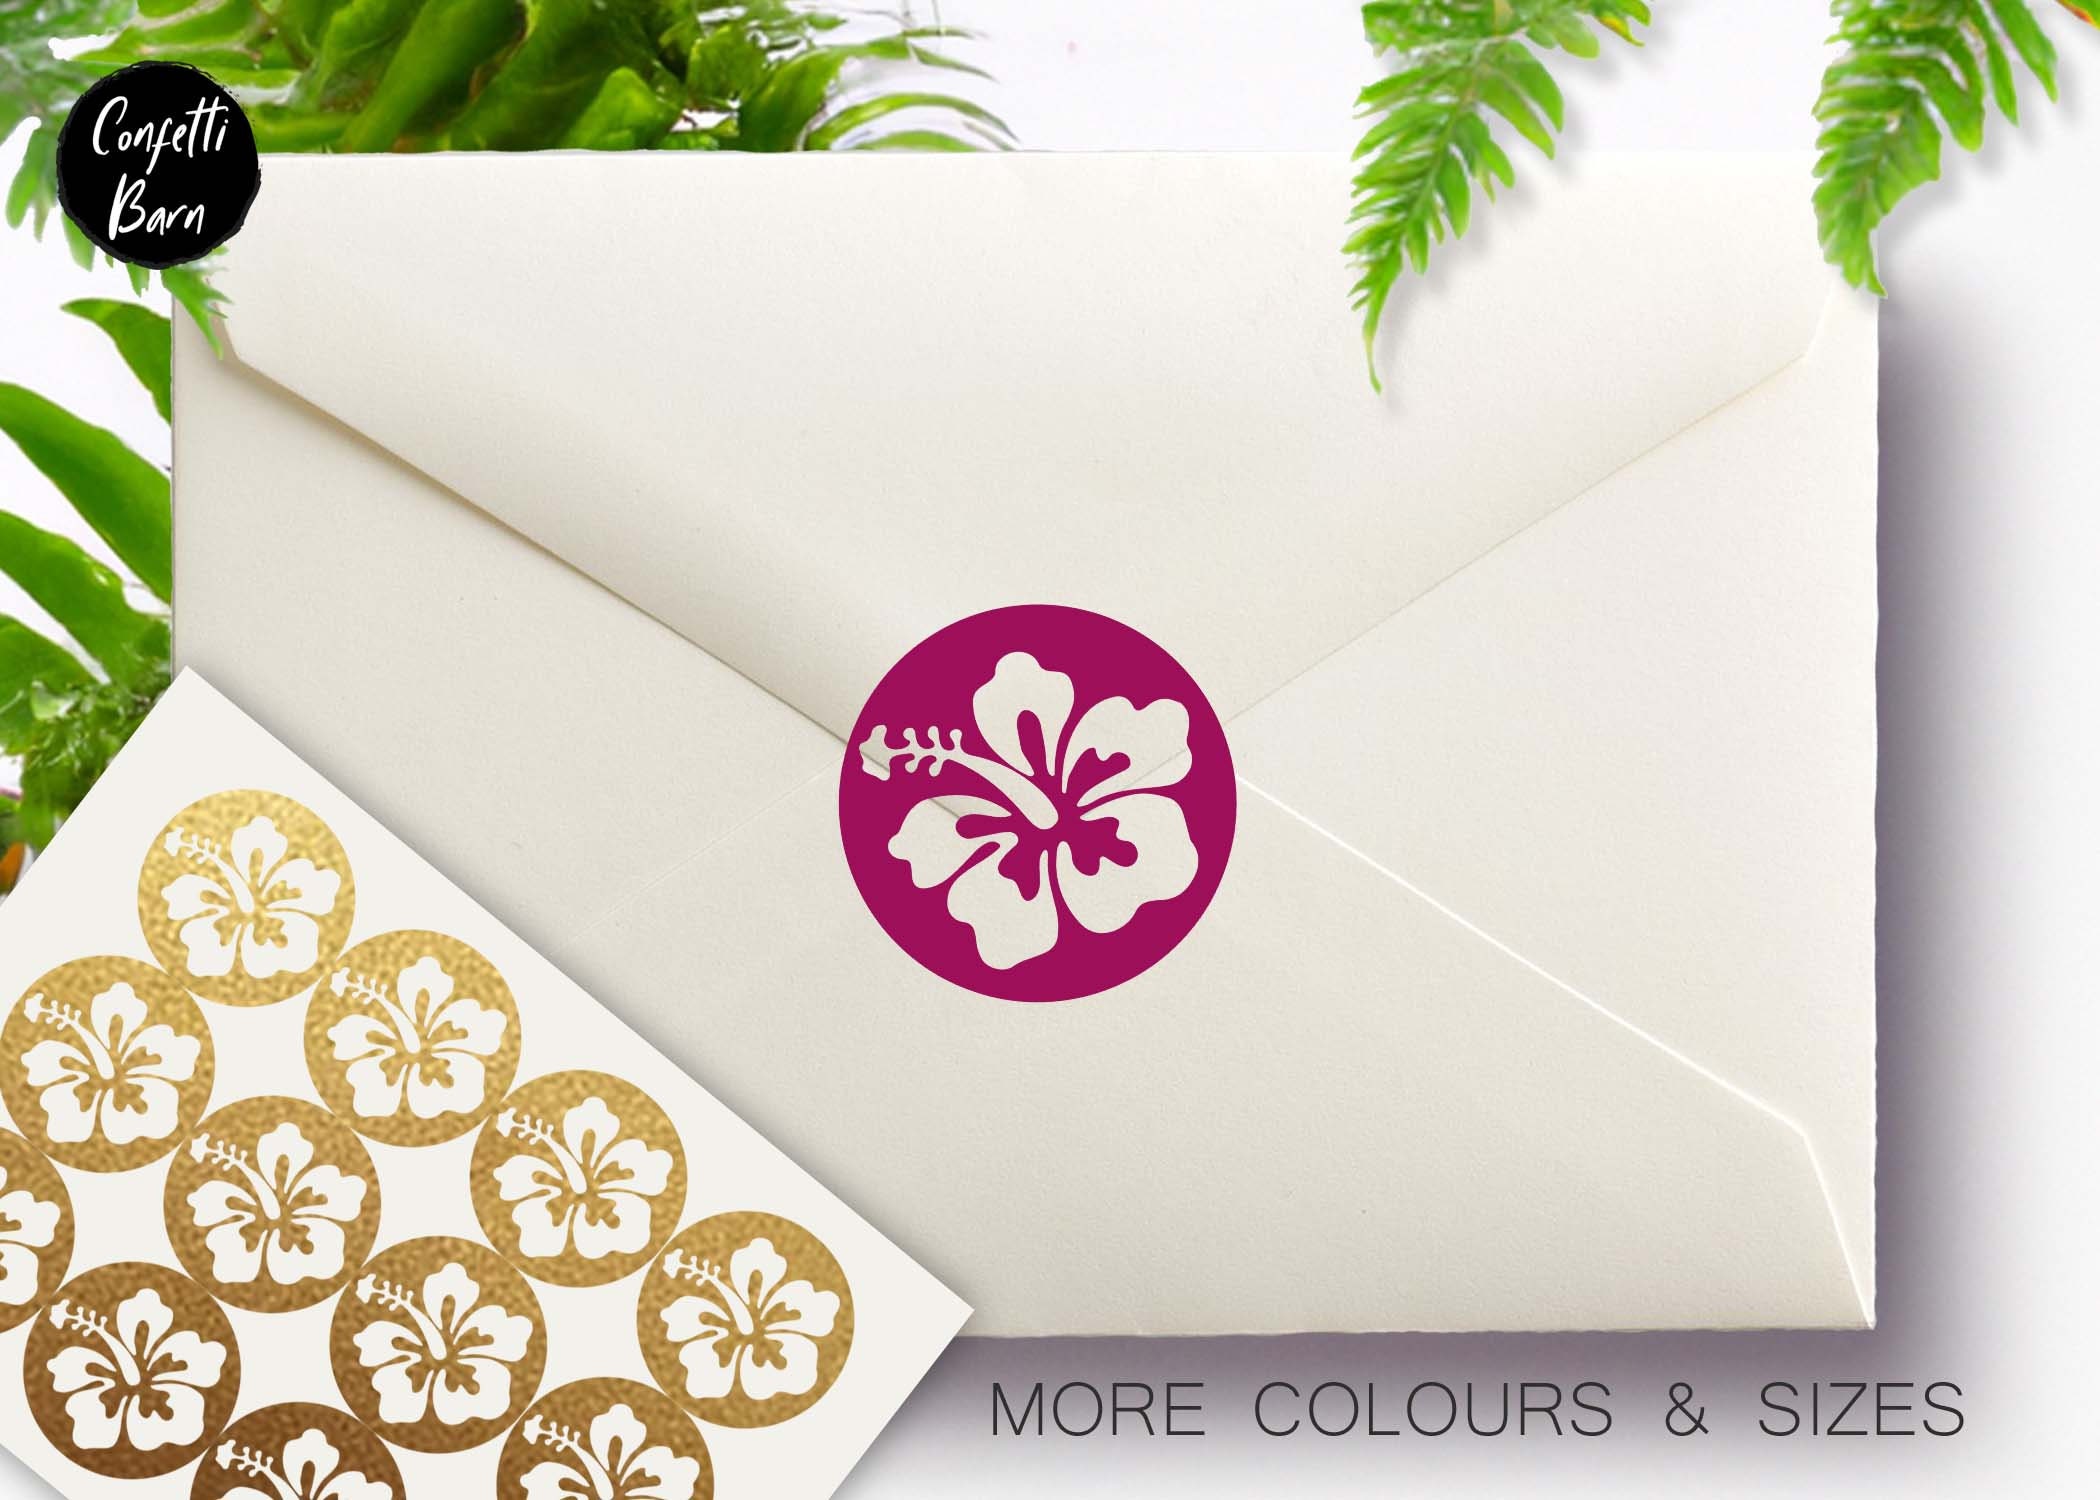 ANEWNICE ld Embossed Envelope Seals Stickers Flowers Plants Self Adhesive  Seal Garden Sculpture Outdoor Decoration